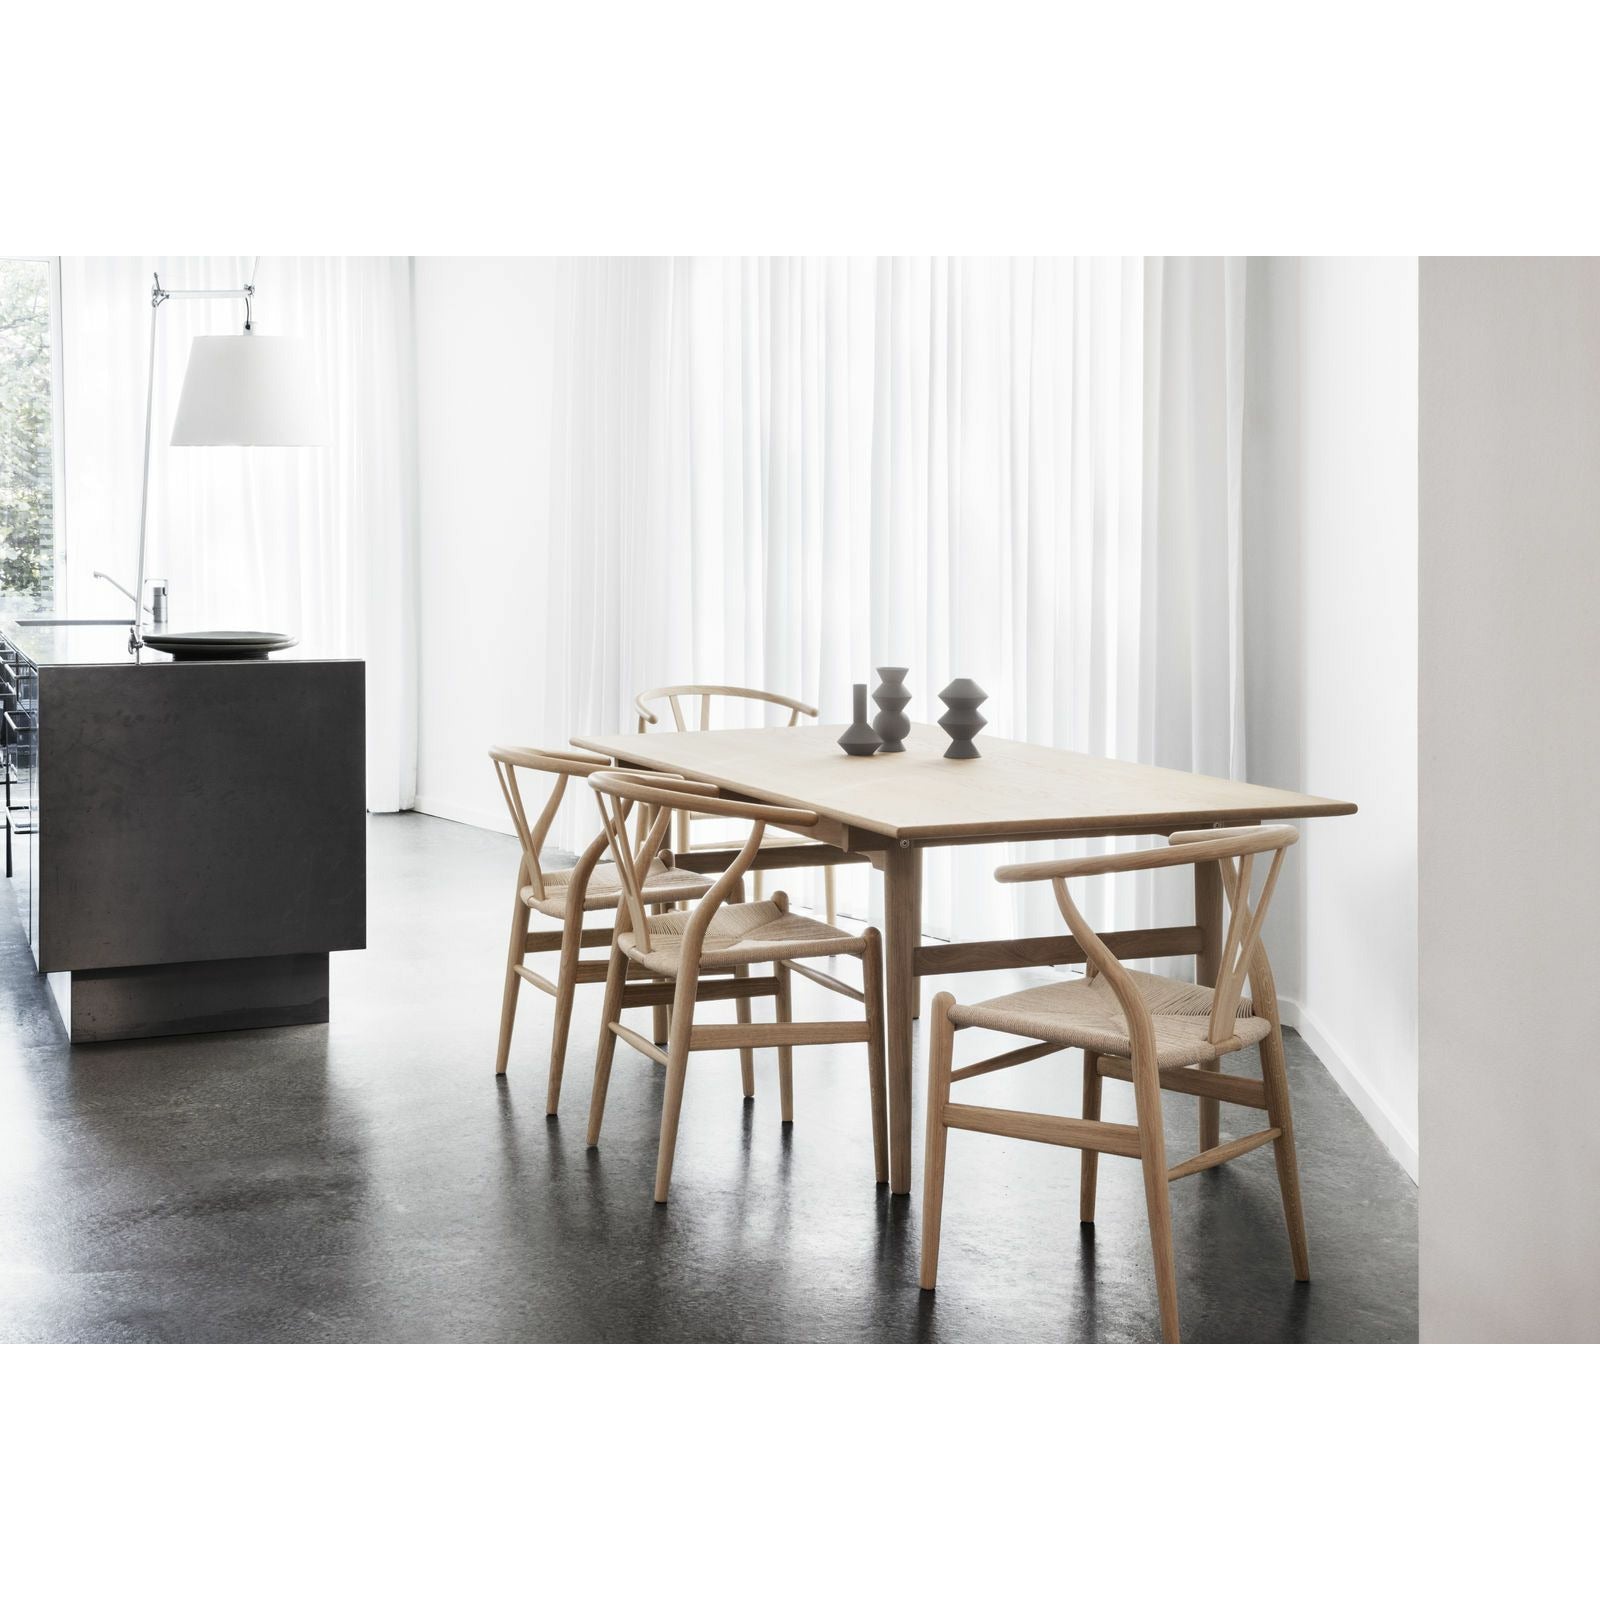 Carl Hansen Ch24 Wishbone Chair Special Edition, Beech Special Edition, Soft Gray